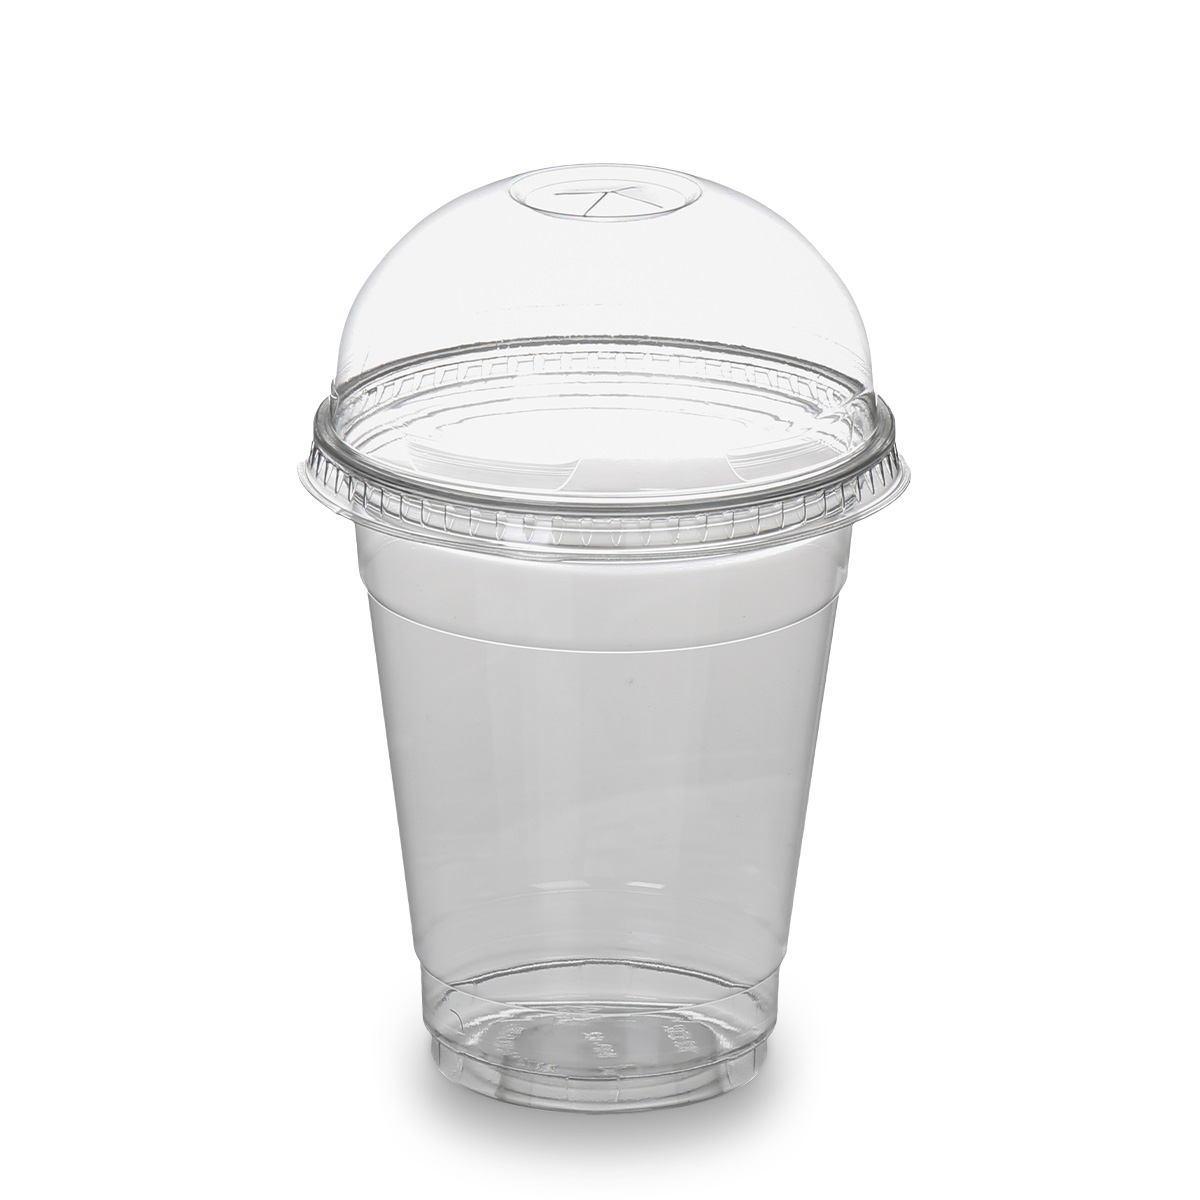 12oz Compostable Smoothie Cups (100)